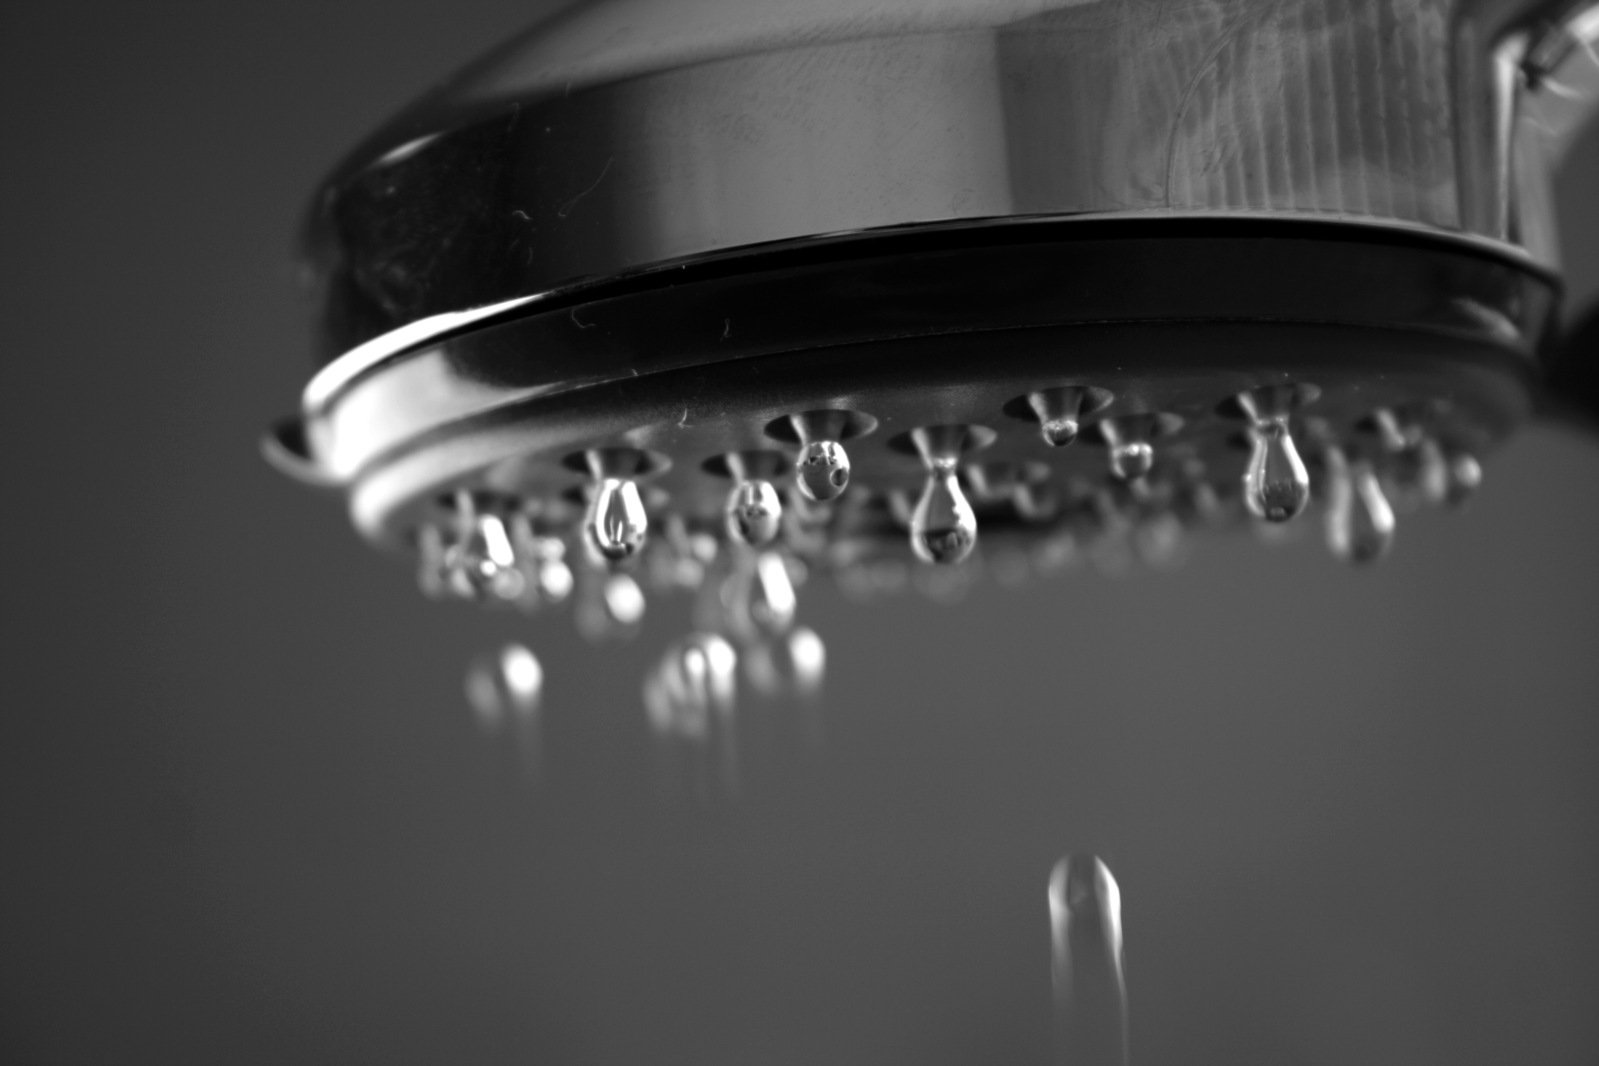 a rain shower head with some water running down